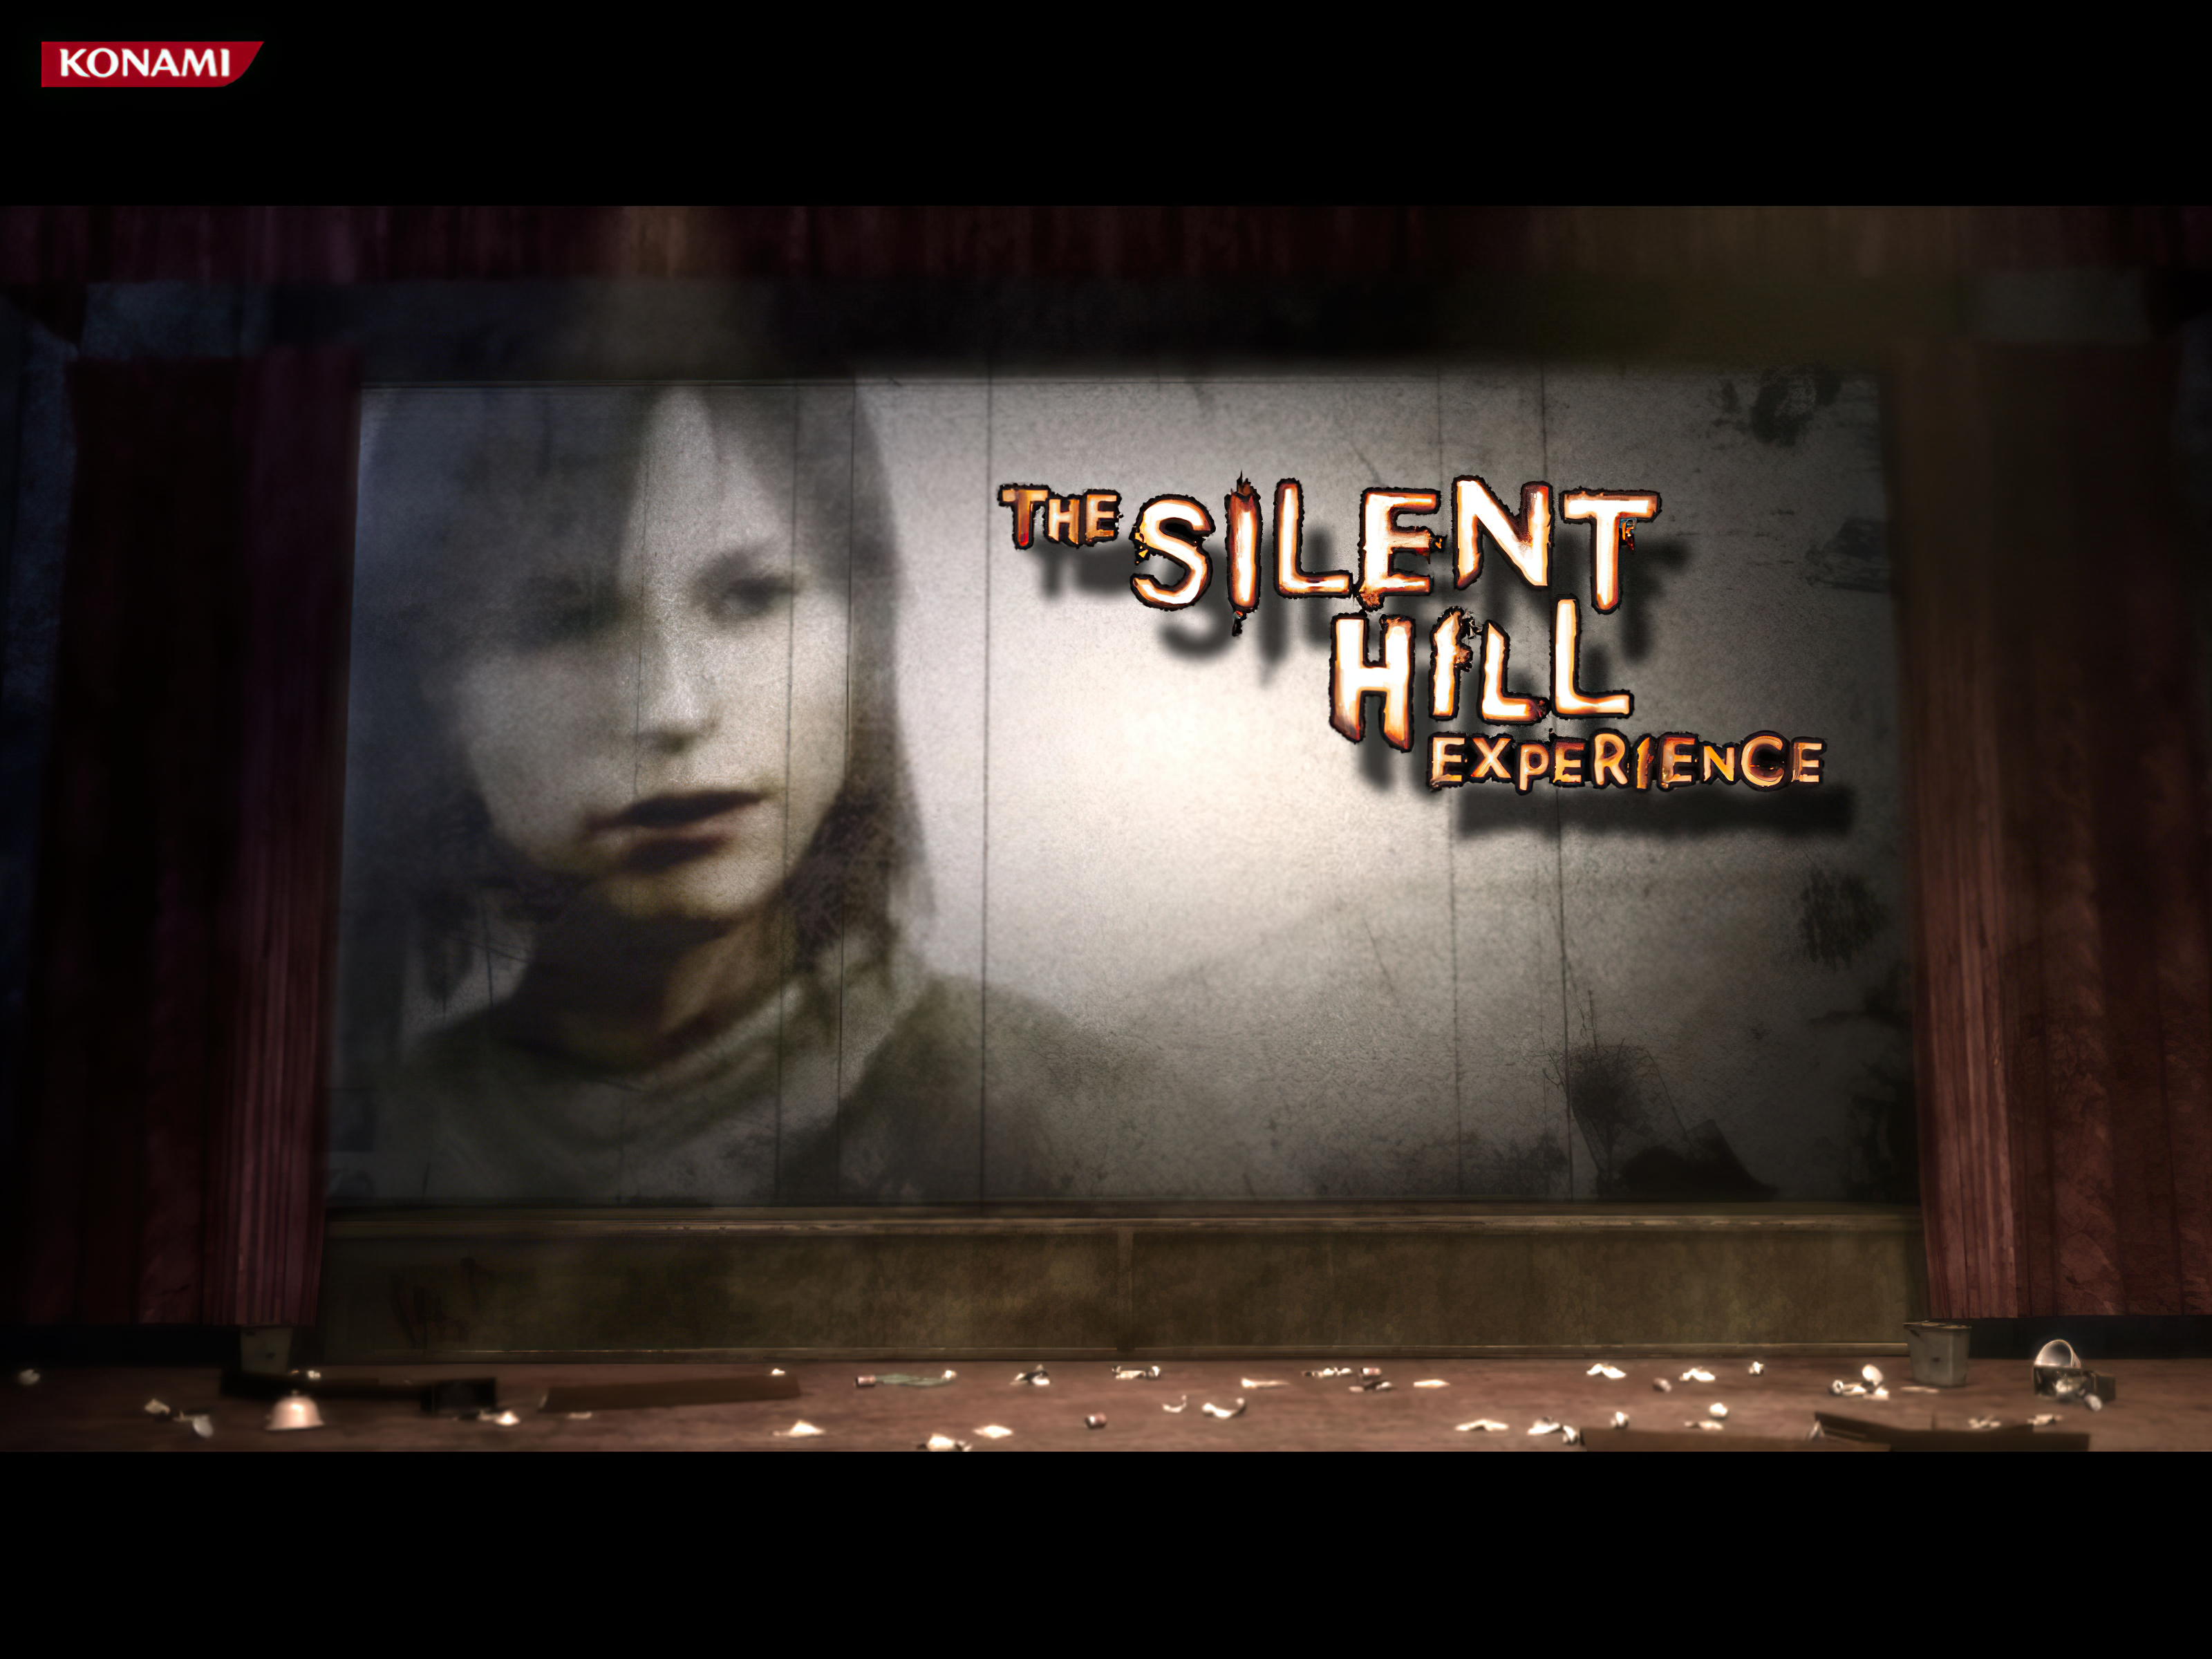 The Silent Hill Experience desktop wallpaper showcasing the eerie ambiance and haunting scenery of the infamous video game.